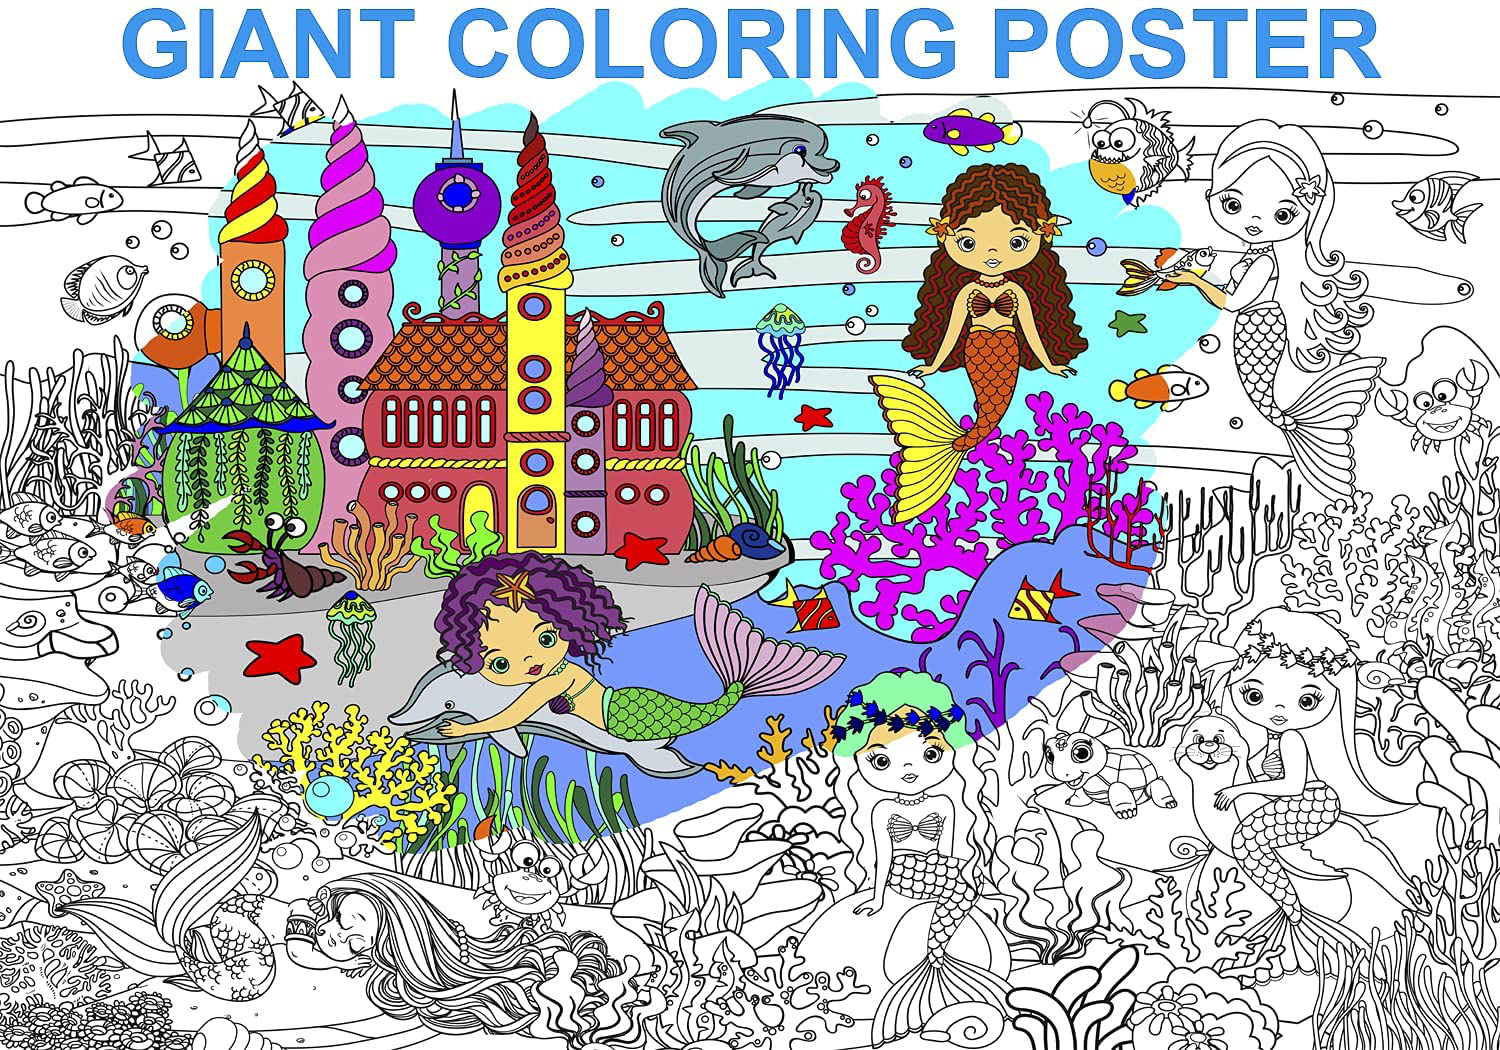 Alex Art, Giant Coloring Poster - Mermaid Large Wall Coloring Pages - Fun Kids Art Project Activities - Jumbo Coloring Sheets Books for Girls - Huge Posters to Color - Big Floor Size 38.5”x26.7”